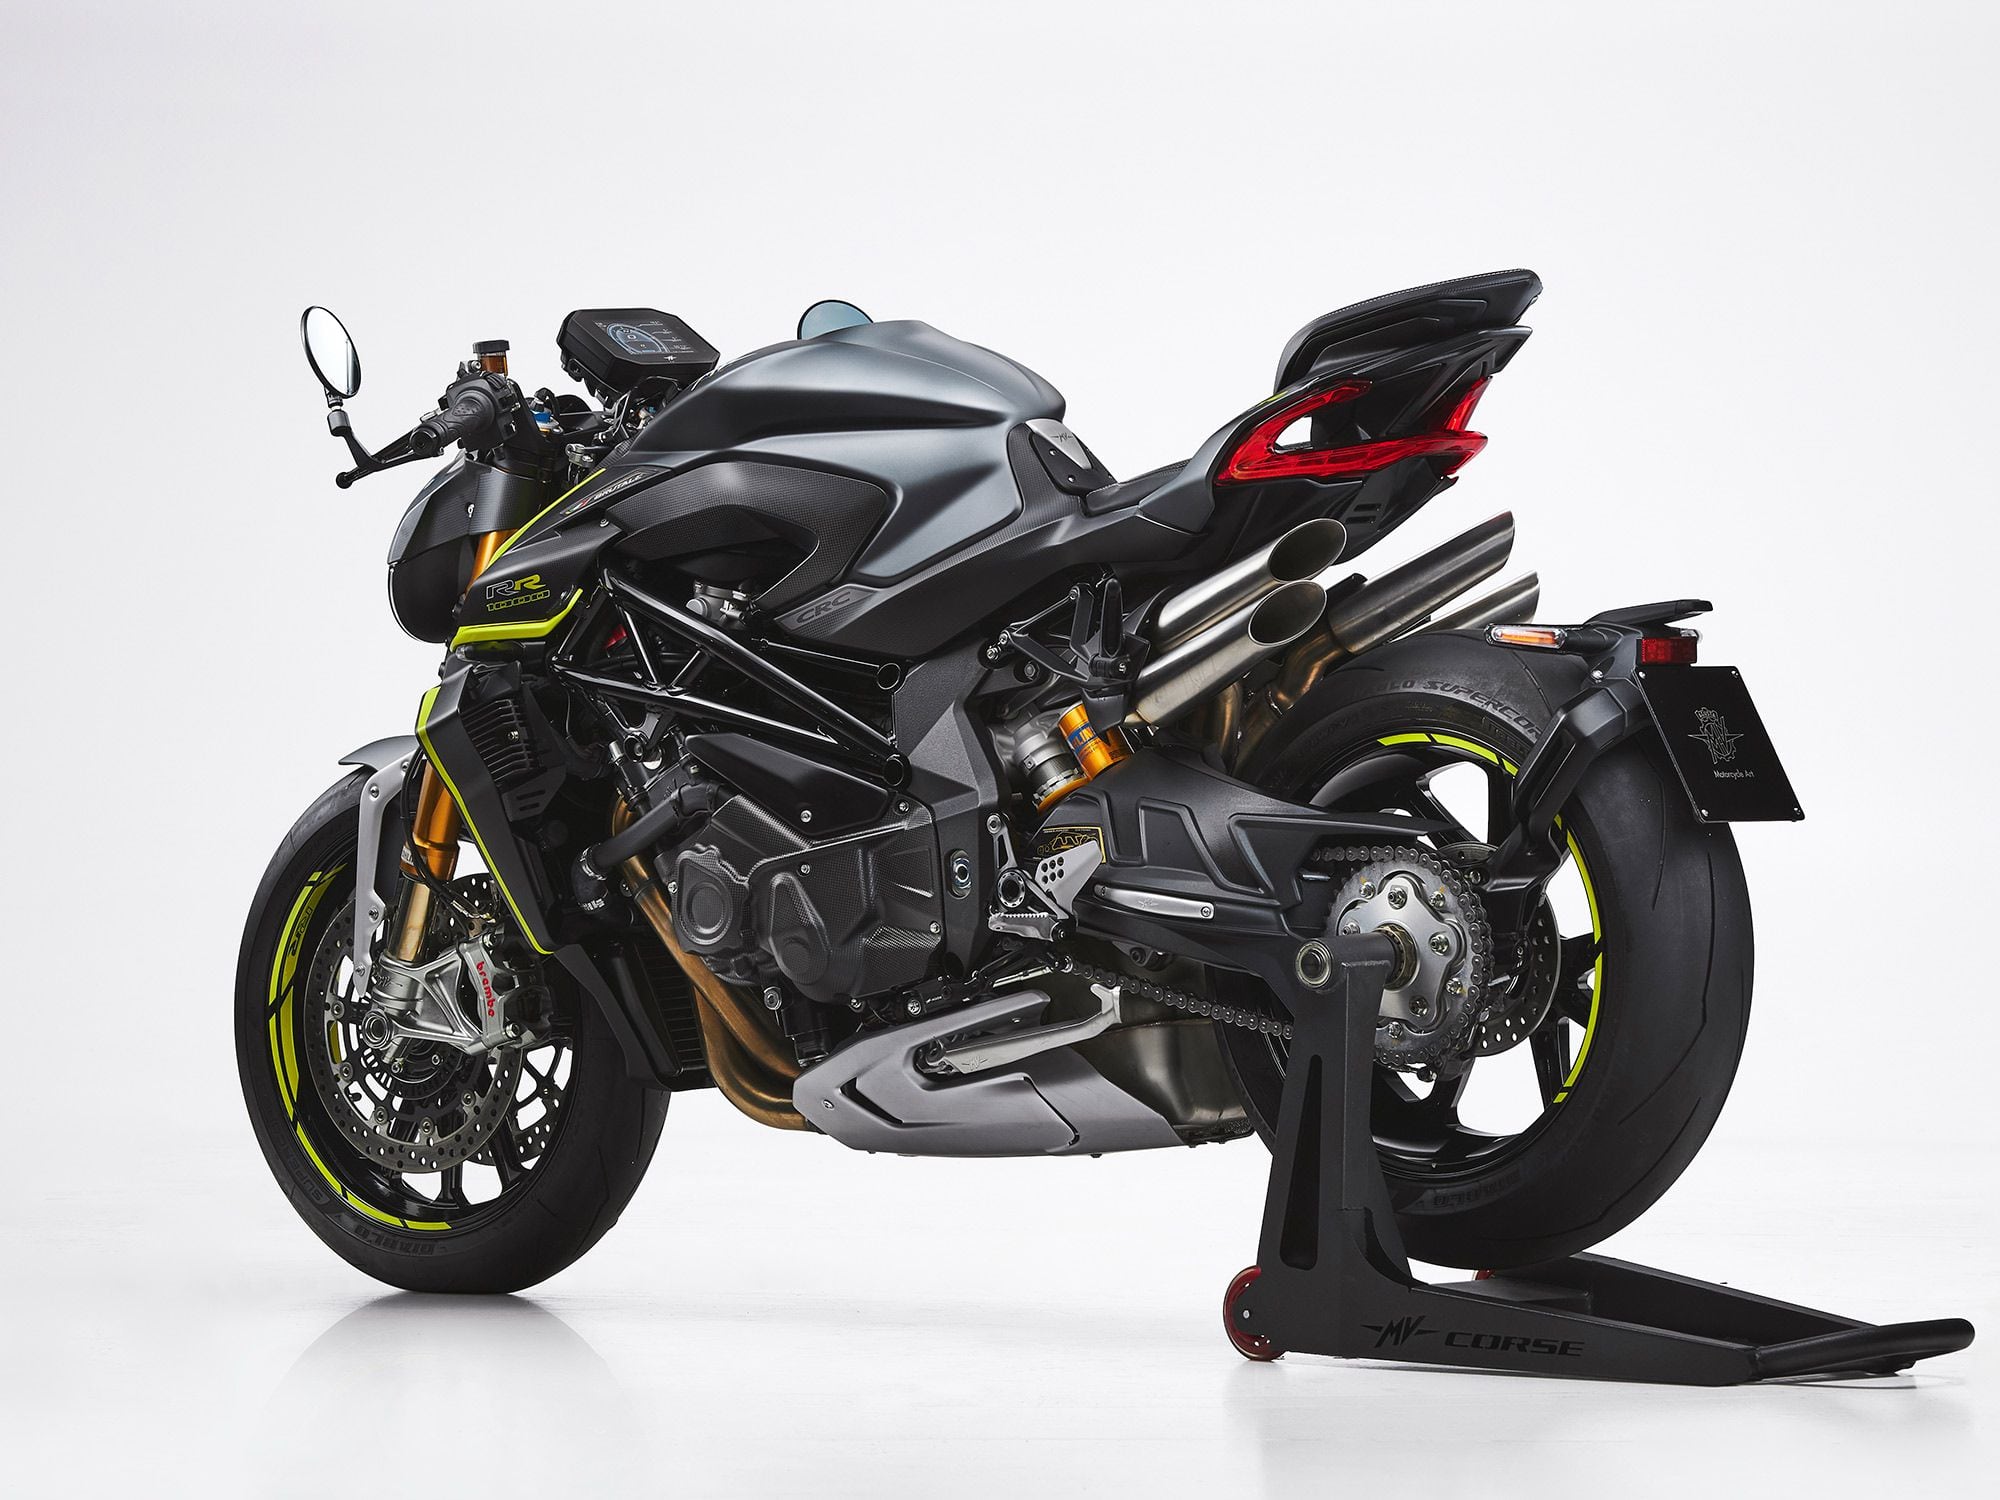 You want to make a statement? MV’s new Brutale 1000 RR stands out in any lineup. Check out the four exhaust pipes and the dense overall packaging.